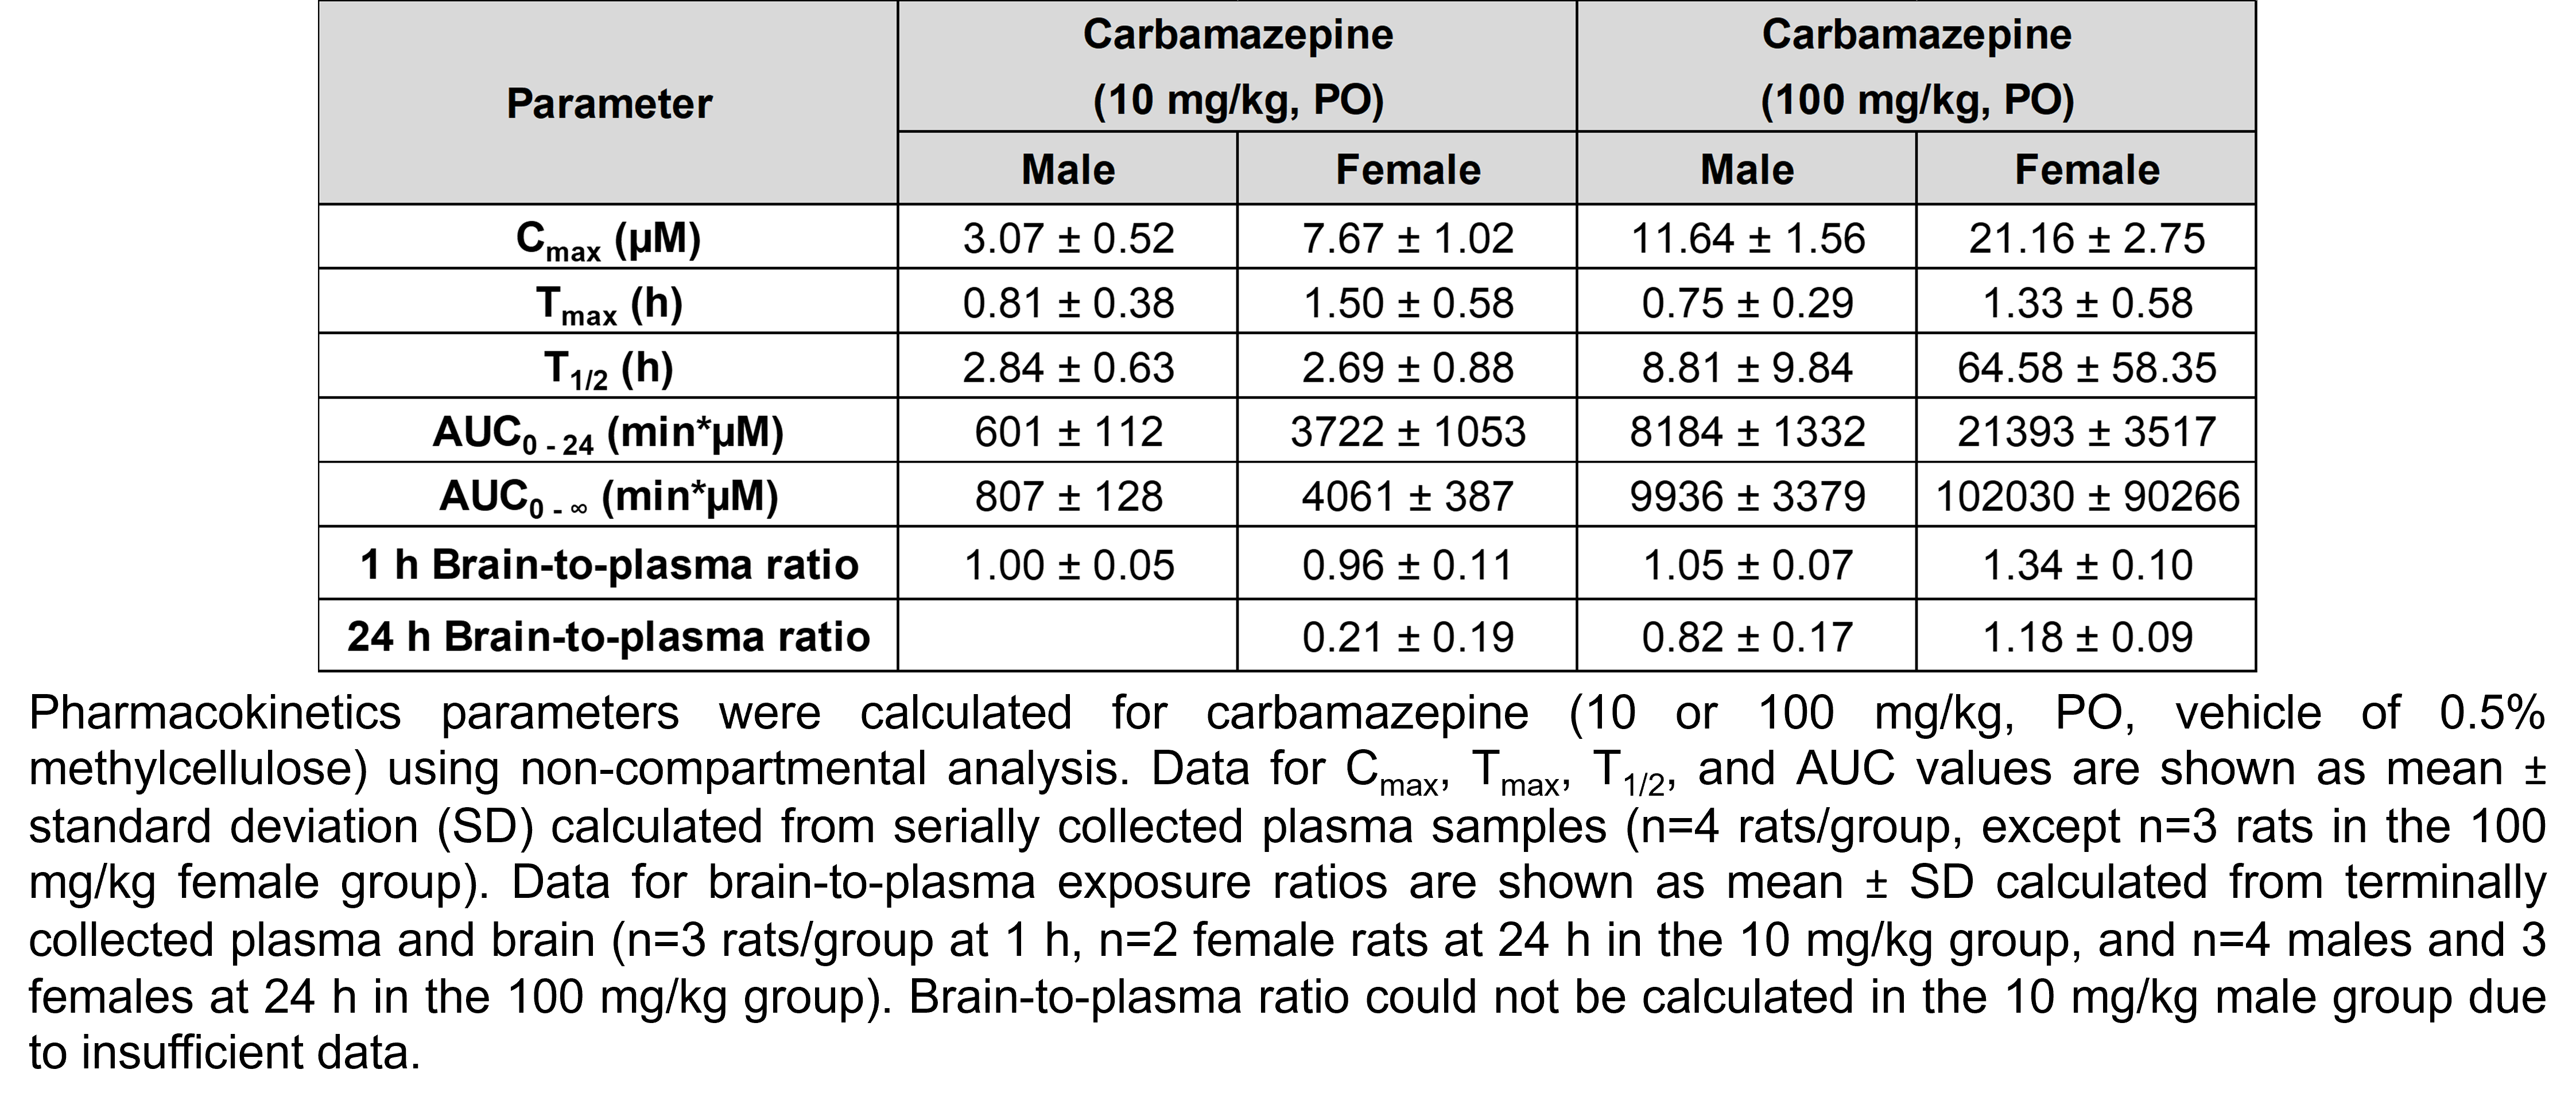 A table shows pharmacokinetics parameters calculated for carbamazepine using non-compartmental analysis in male and female rats treated with carbamazepine (10 or 100 mg/kg, PO, vehicle of 0.5% methylcellulose). The means for the 4 groups (males and females treated with 10 mg/kg carbamazepine and males and females treated with 100 mg/kg carbamazepine, respectively) are as follows. The highest concentration (Cmax) was 3.07, 7.67, 11.64, and 21.16 µM; the time at the maximum concentration (Tmax) was 0.81, 1.5, 0.75, and 1.33 hours; the half-life (T1/2) was 2.84, 2.69, 8.81, and 64.58 hours; area under the curve for time 0 to 24 hours was 601, 3722, 8184, and 21393 minutes*µM; area under the curve for time 0 to infinity was 807, 4061, 9936, and 102030 minutes*µM; the brain-to-plasma ratio at 1 hour was 1.0, 0.96, 1.05, and 1.34; the brain-to-plasma ratio at 24 hours was not calculated, 0.21, 0.82, and 1.18